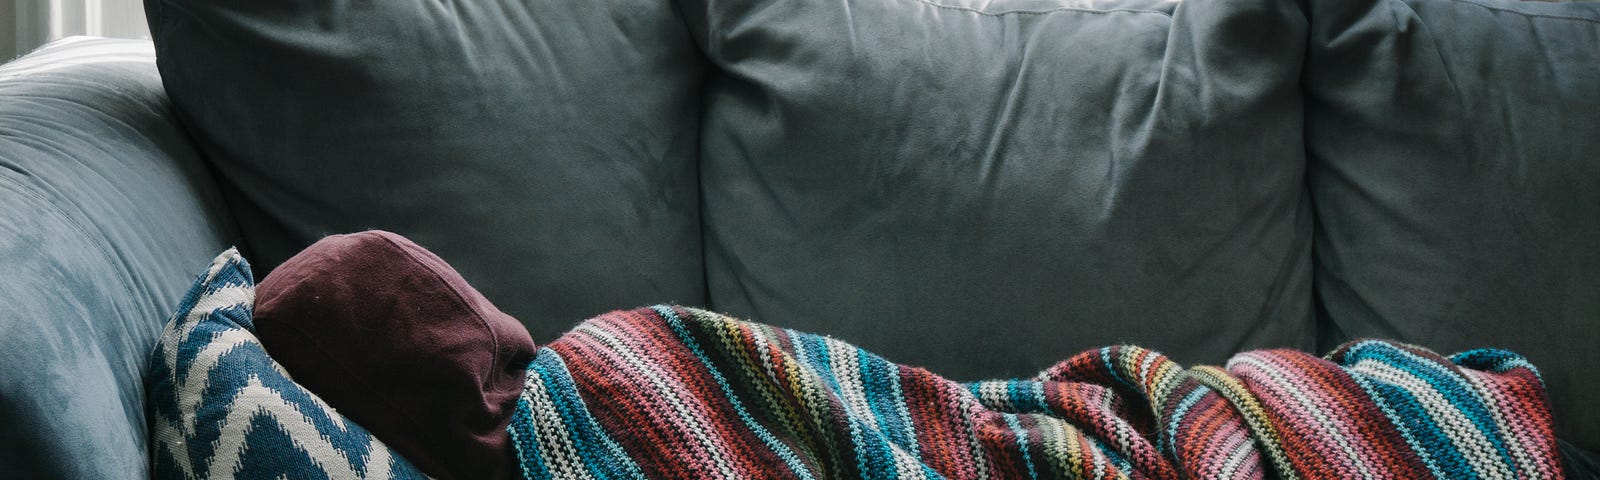 A person lying on a couch, wearing a hoodie and using a pillow and blanket.